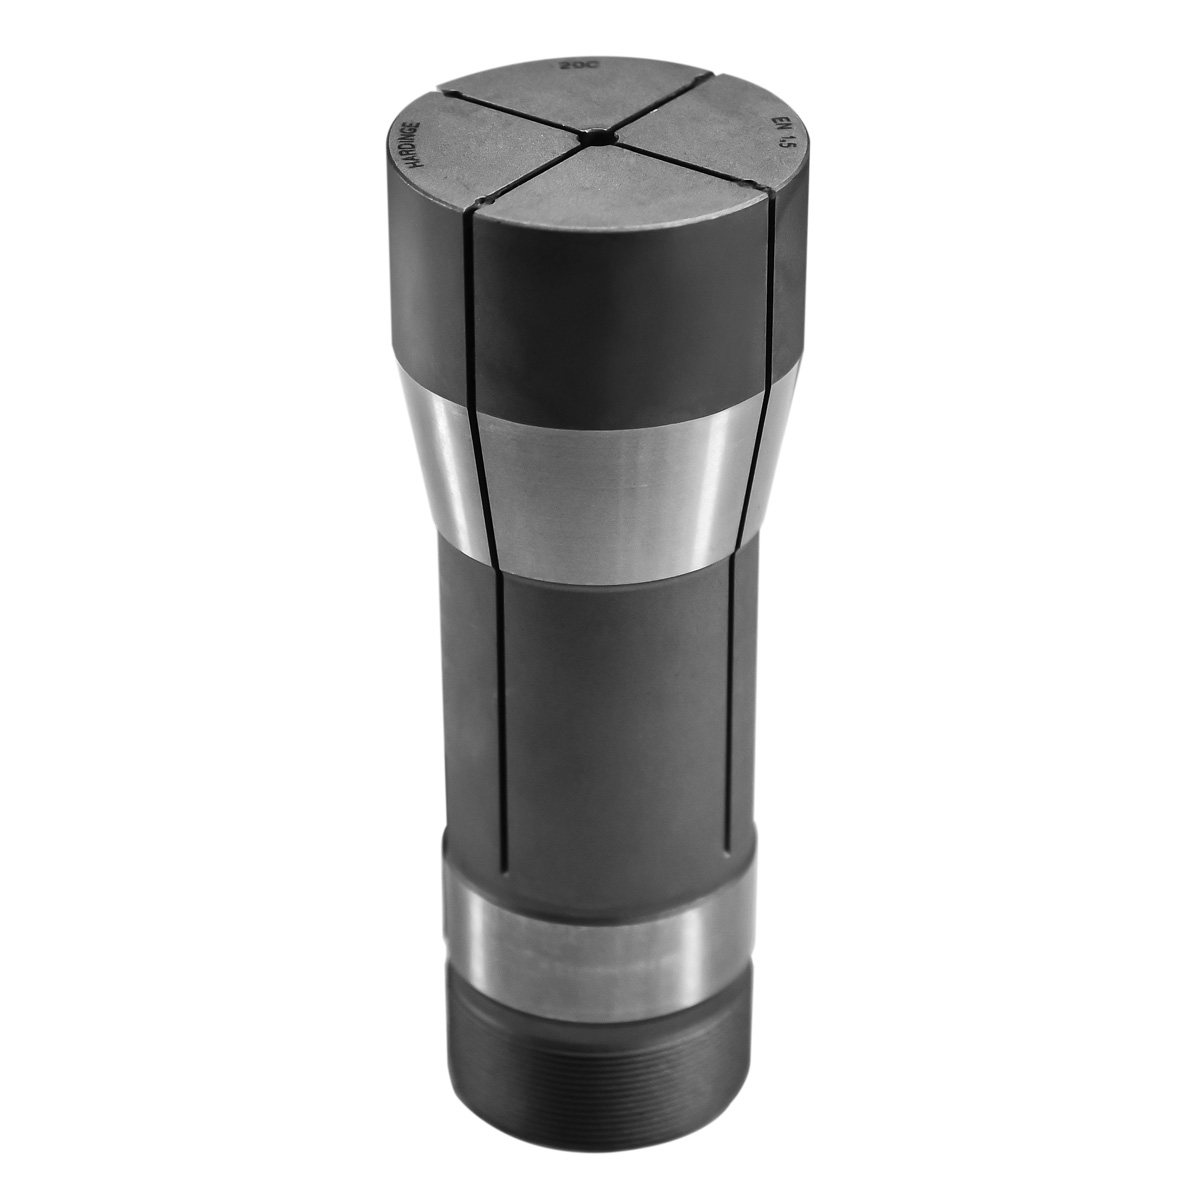 20C 1-1/2" Extended Nose Emergency Collet with 1/4" pilot hole and 4 slots